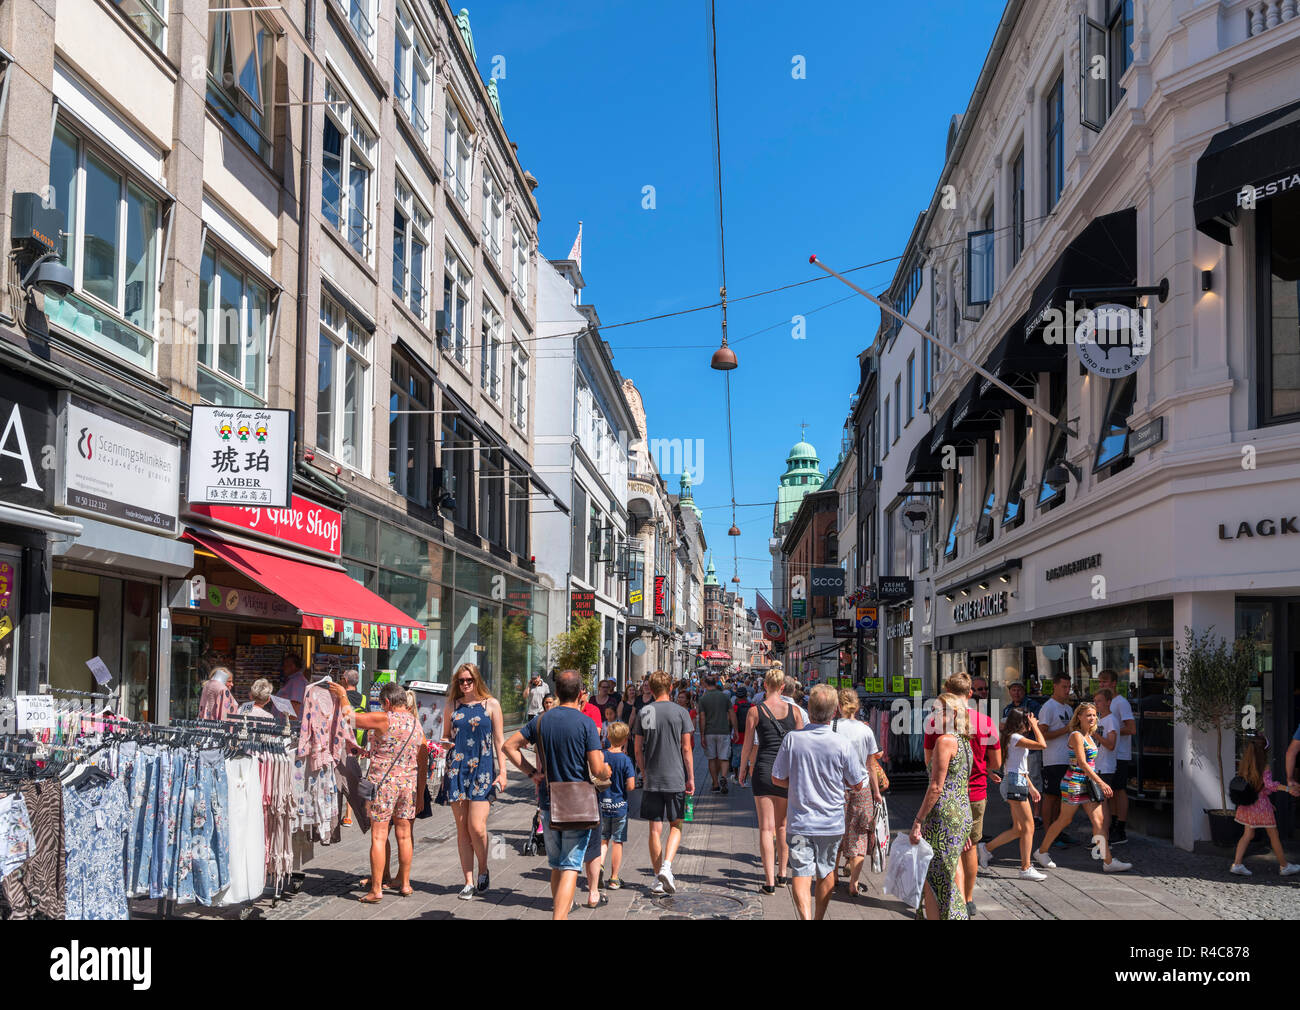 Shopping Copenhagen High Resolution Stock Photography and Images - Alamy